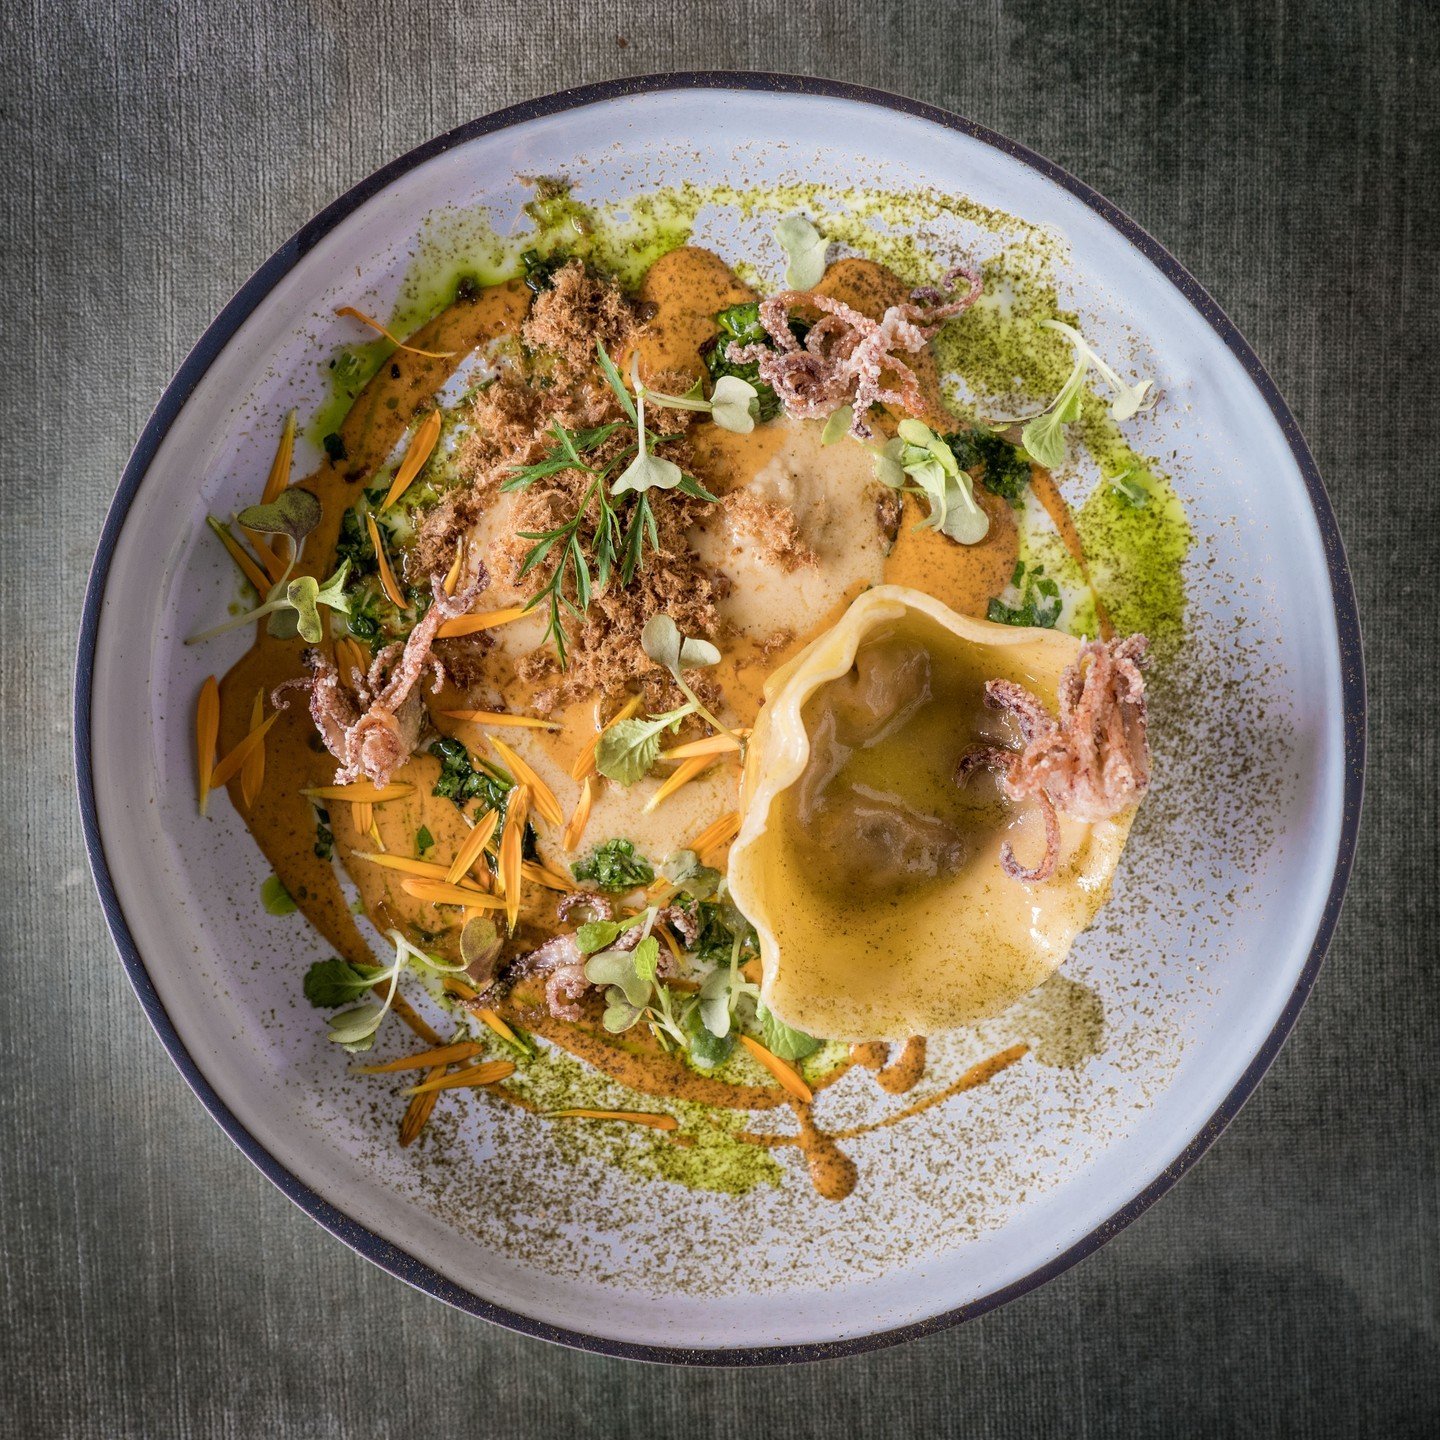 OCTOPUS TORTELLINI
 
Gremolata, candied lemon, brie custard, biltong floss, crispy squid
 
There is less than a week until our FOOD &amp; WINE PAIRING DINNER WITH MULLINEUX WINES. Be sure to join us for a night of luxurious indulgence featuring the e